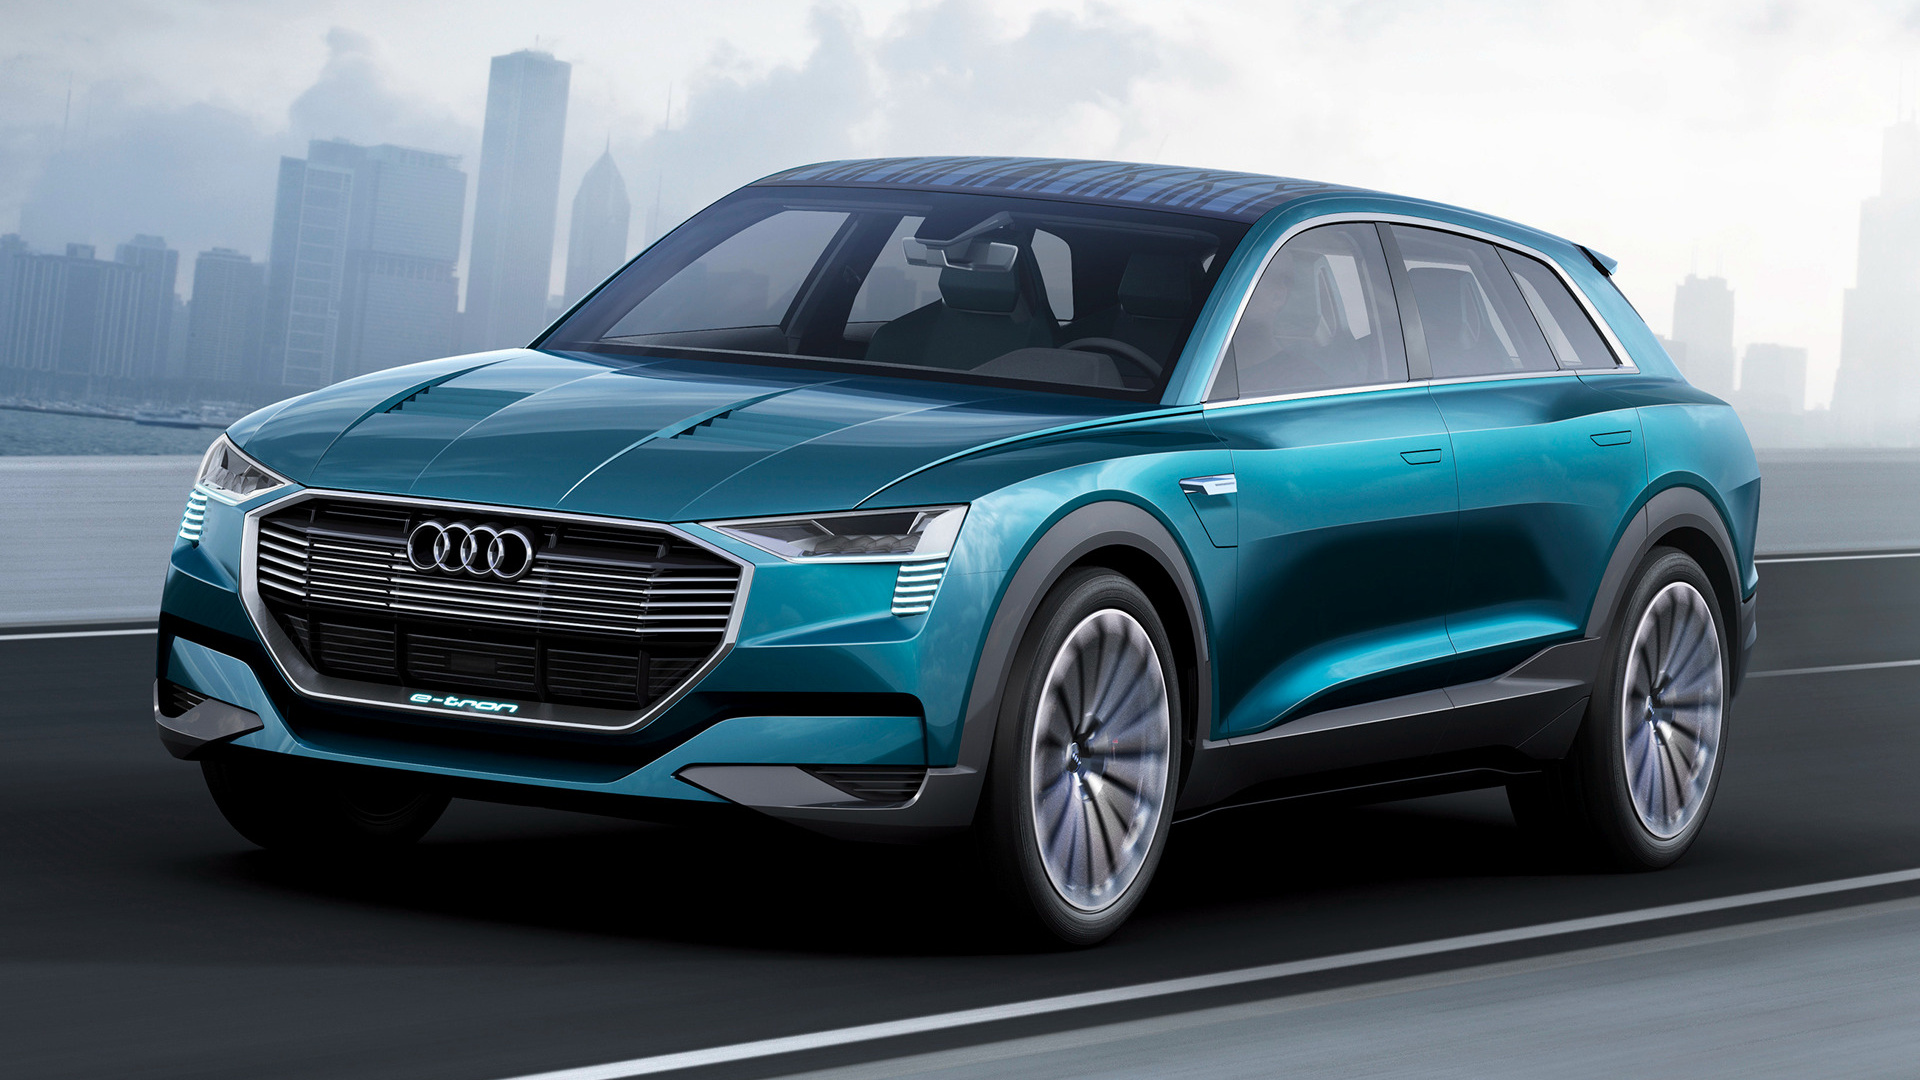 Audi etron quattro concept 2015 Wallpapers and HD Images